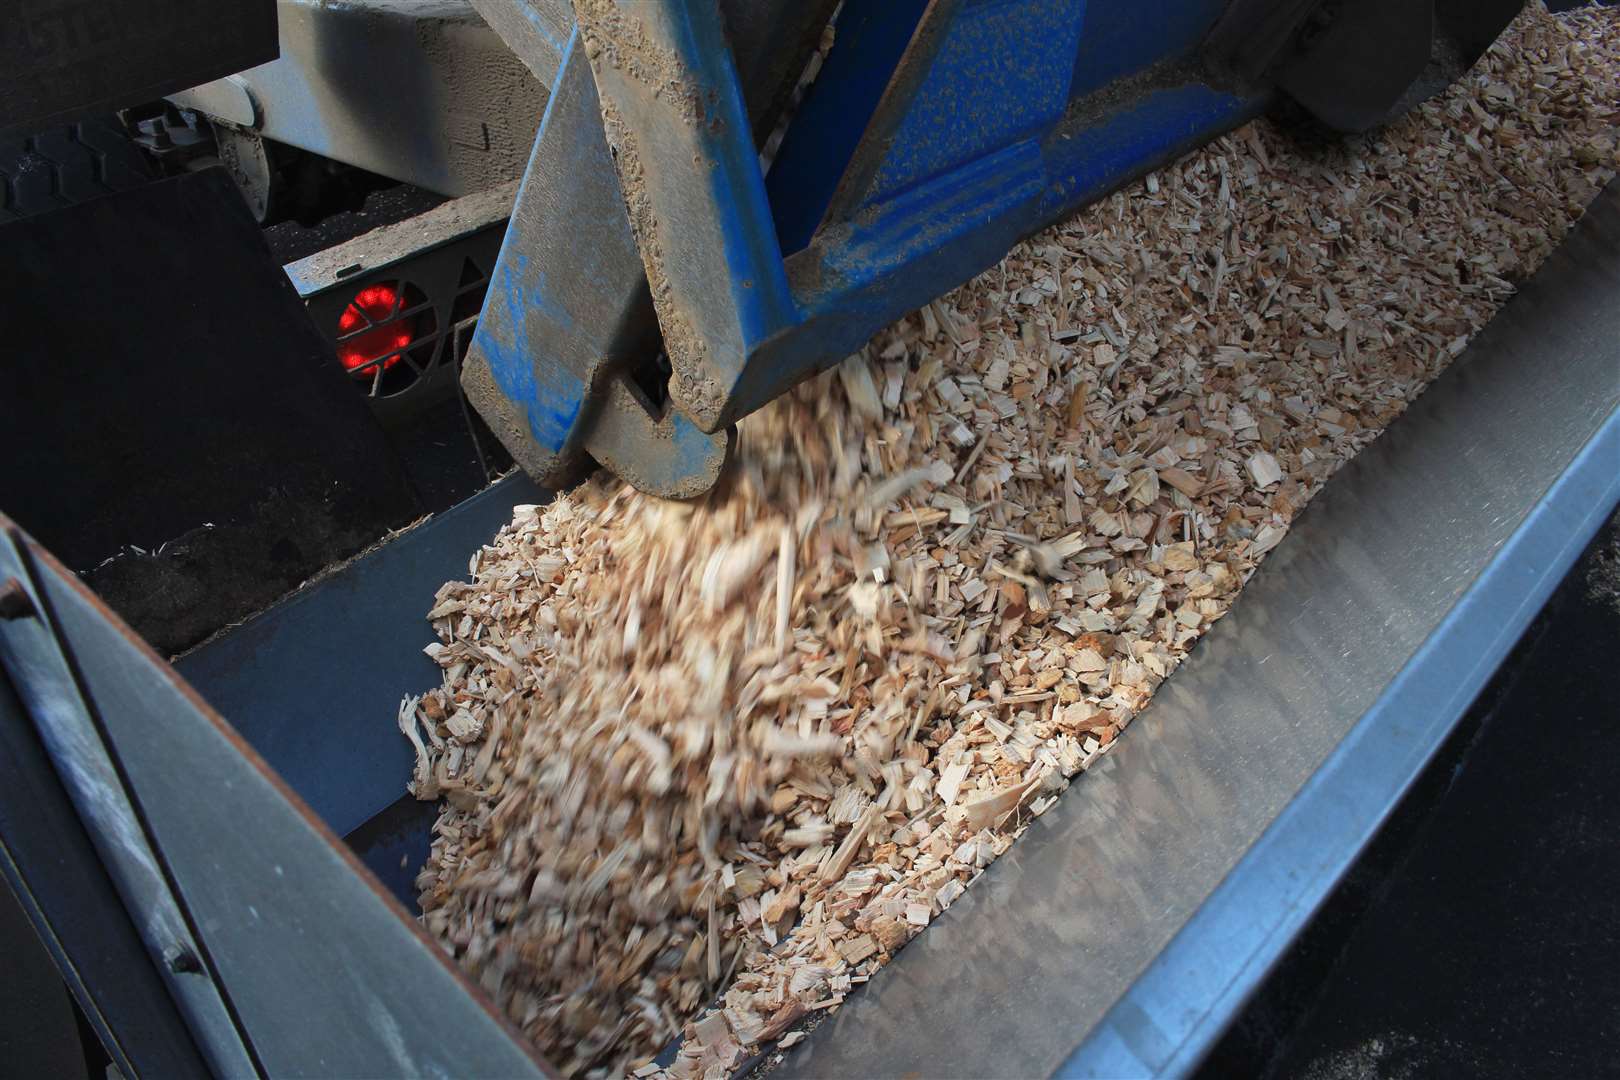 The Ignis plant burns approximately 700 tonnes of locally sourced woodchips each month.